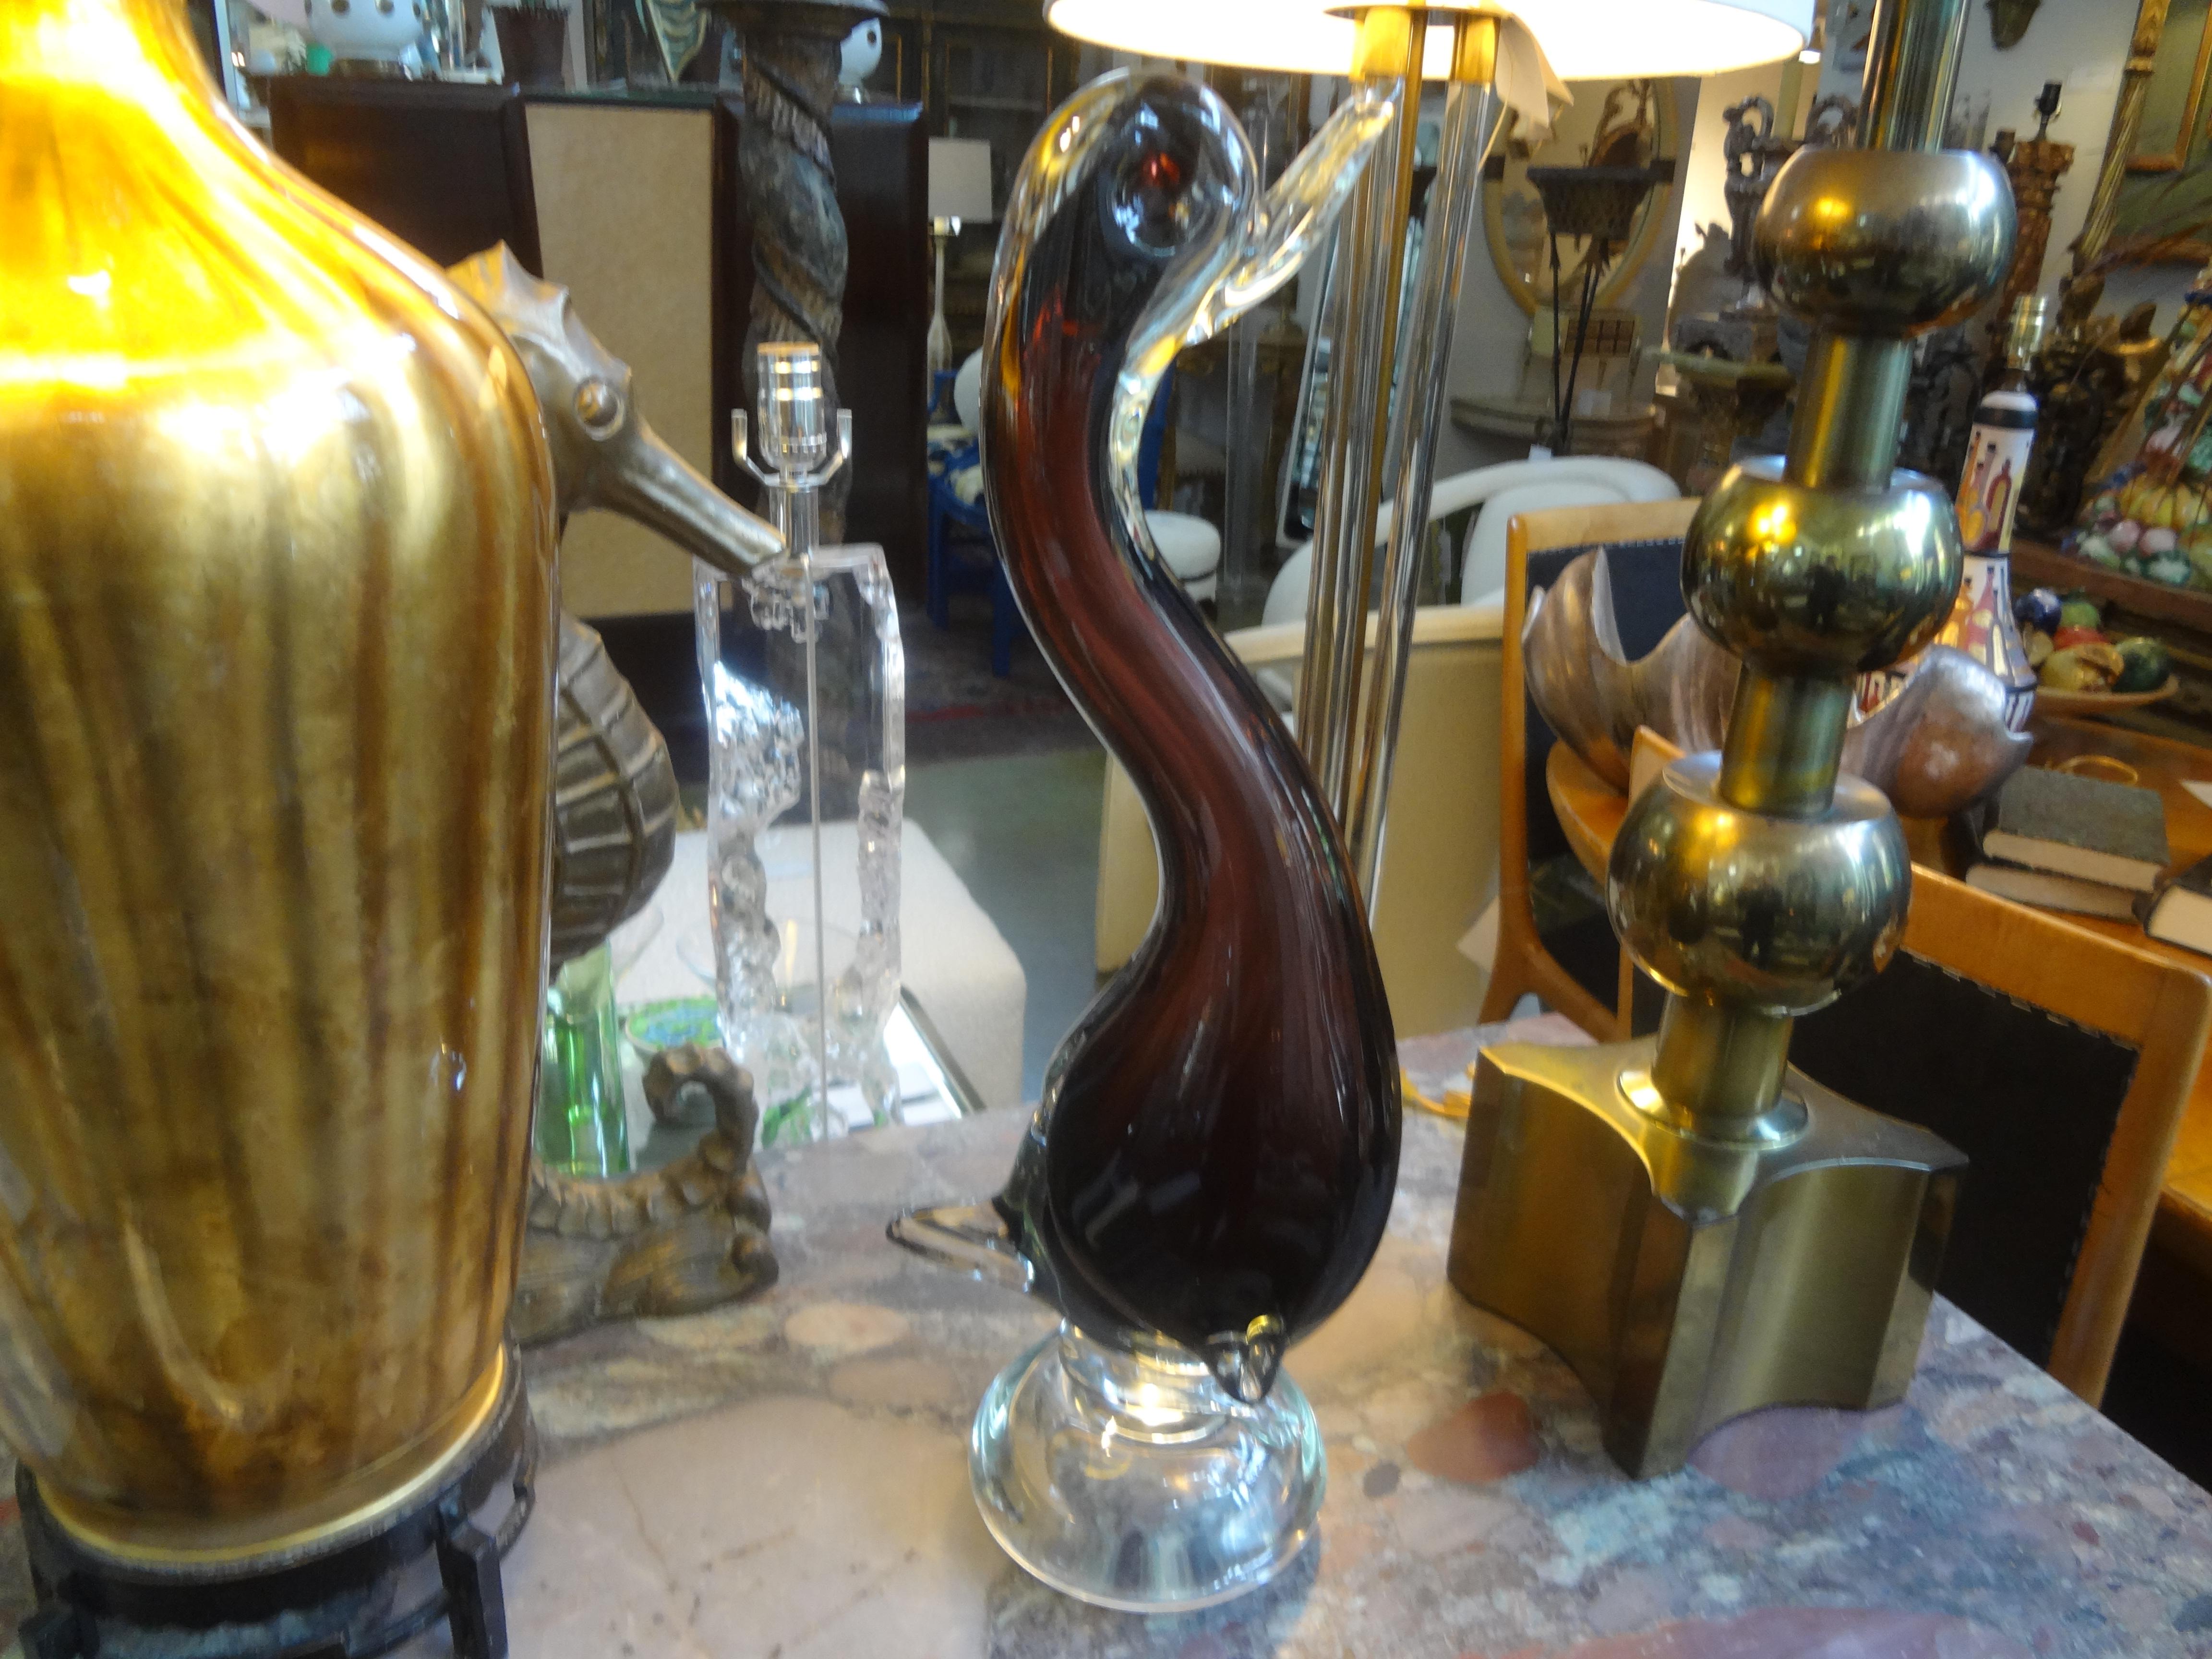 Large Venini style Murano glass duck. This stunning murano glass duck is executed in.
A beautiful shade of purple and clear. Our murano glass duck sculpture is a must have for the duck or animal enthusiast.